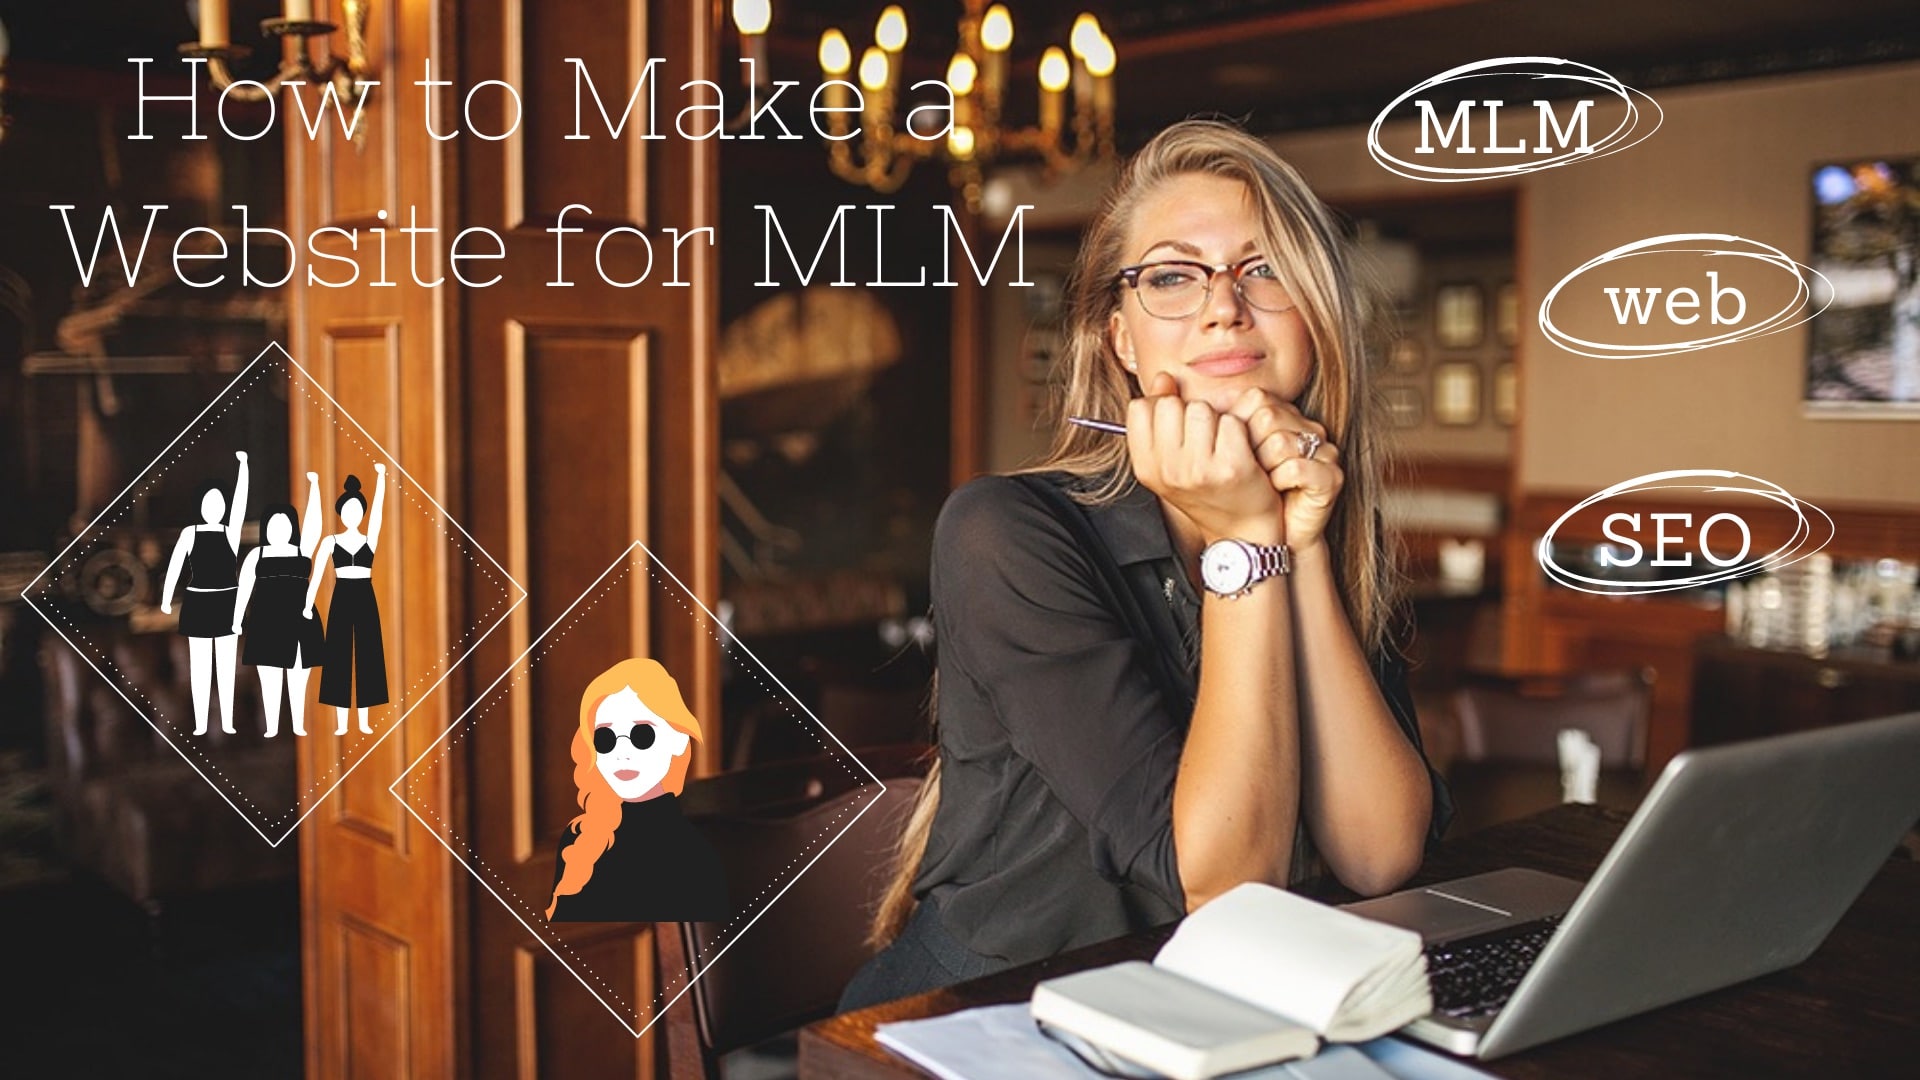 Woman thinking how to make a website for MLM